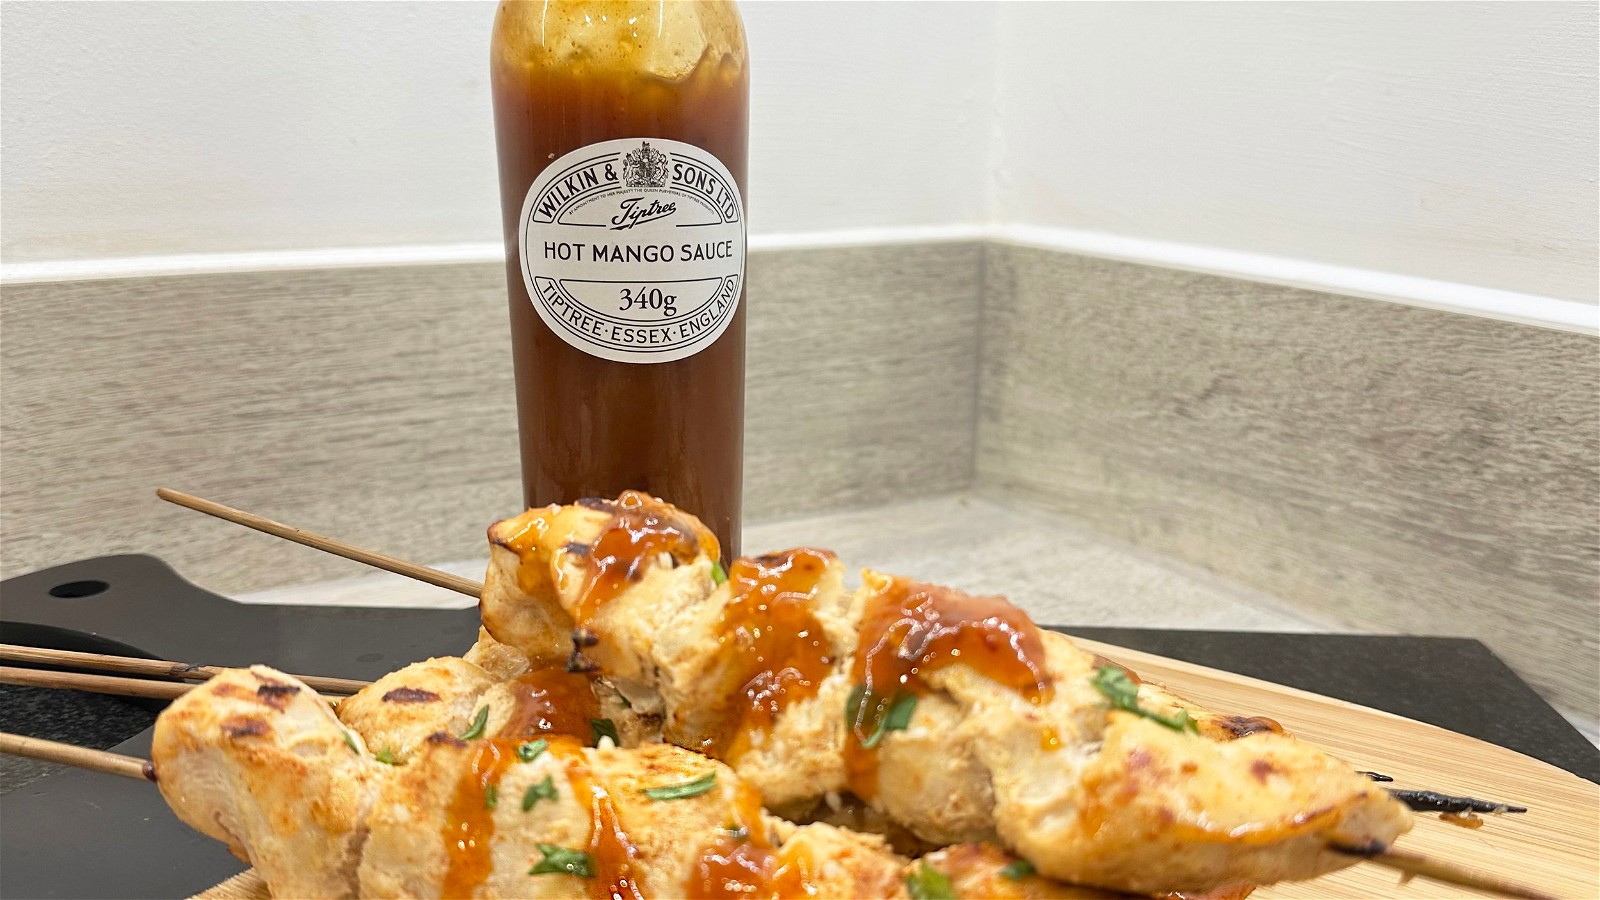 Image of chicken skewers with tiptree hot mango sauce